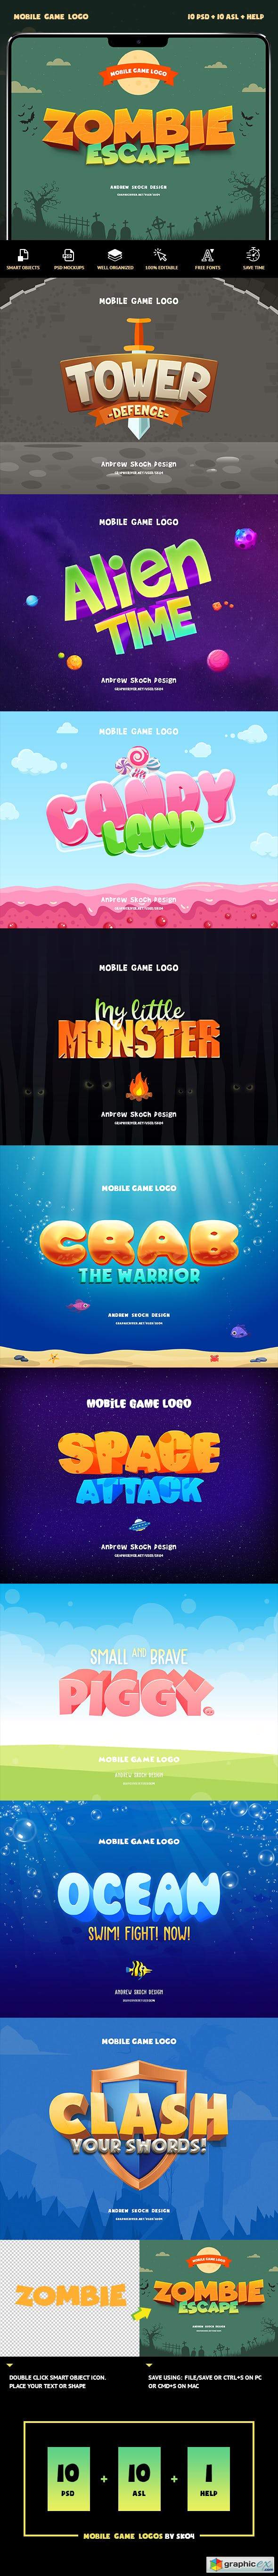 Mobile Game Text Effects vol 1